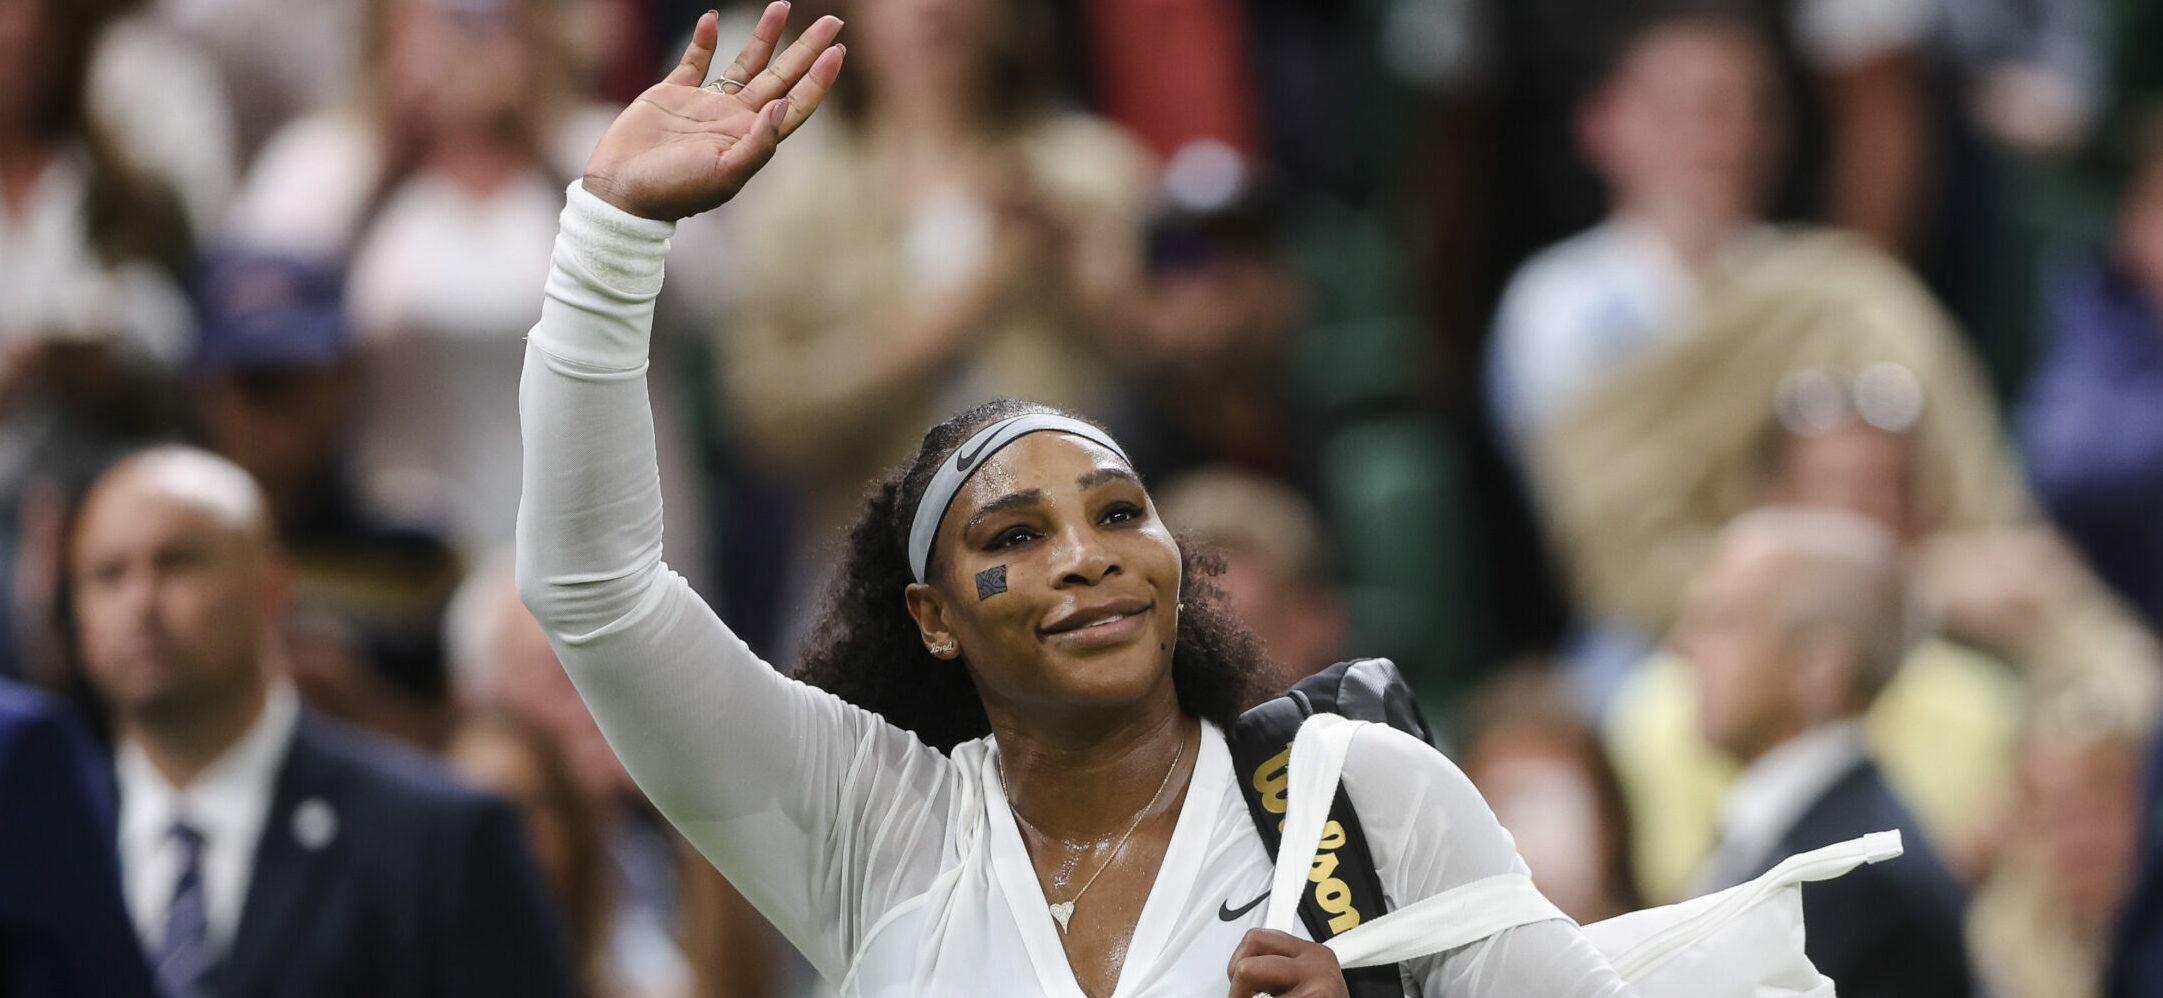 Serena Williams is positive after Wimbledon loss